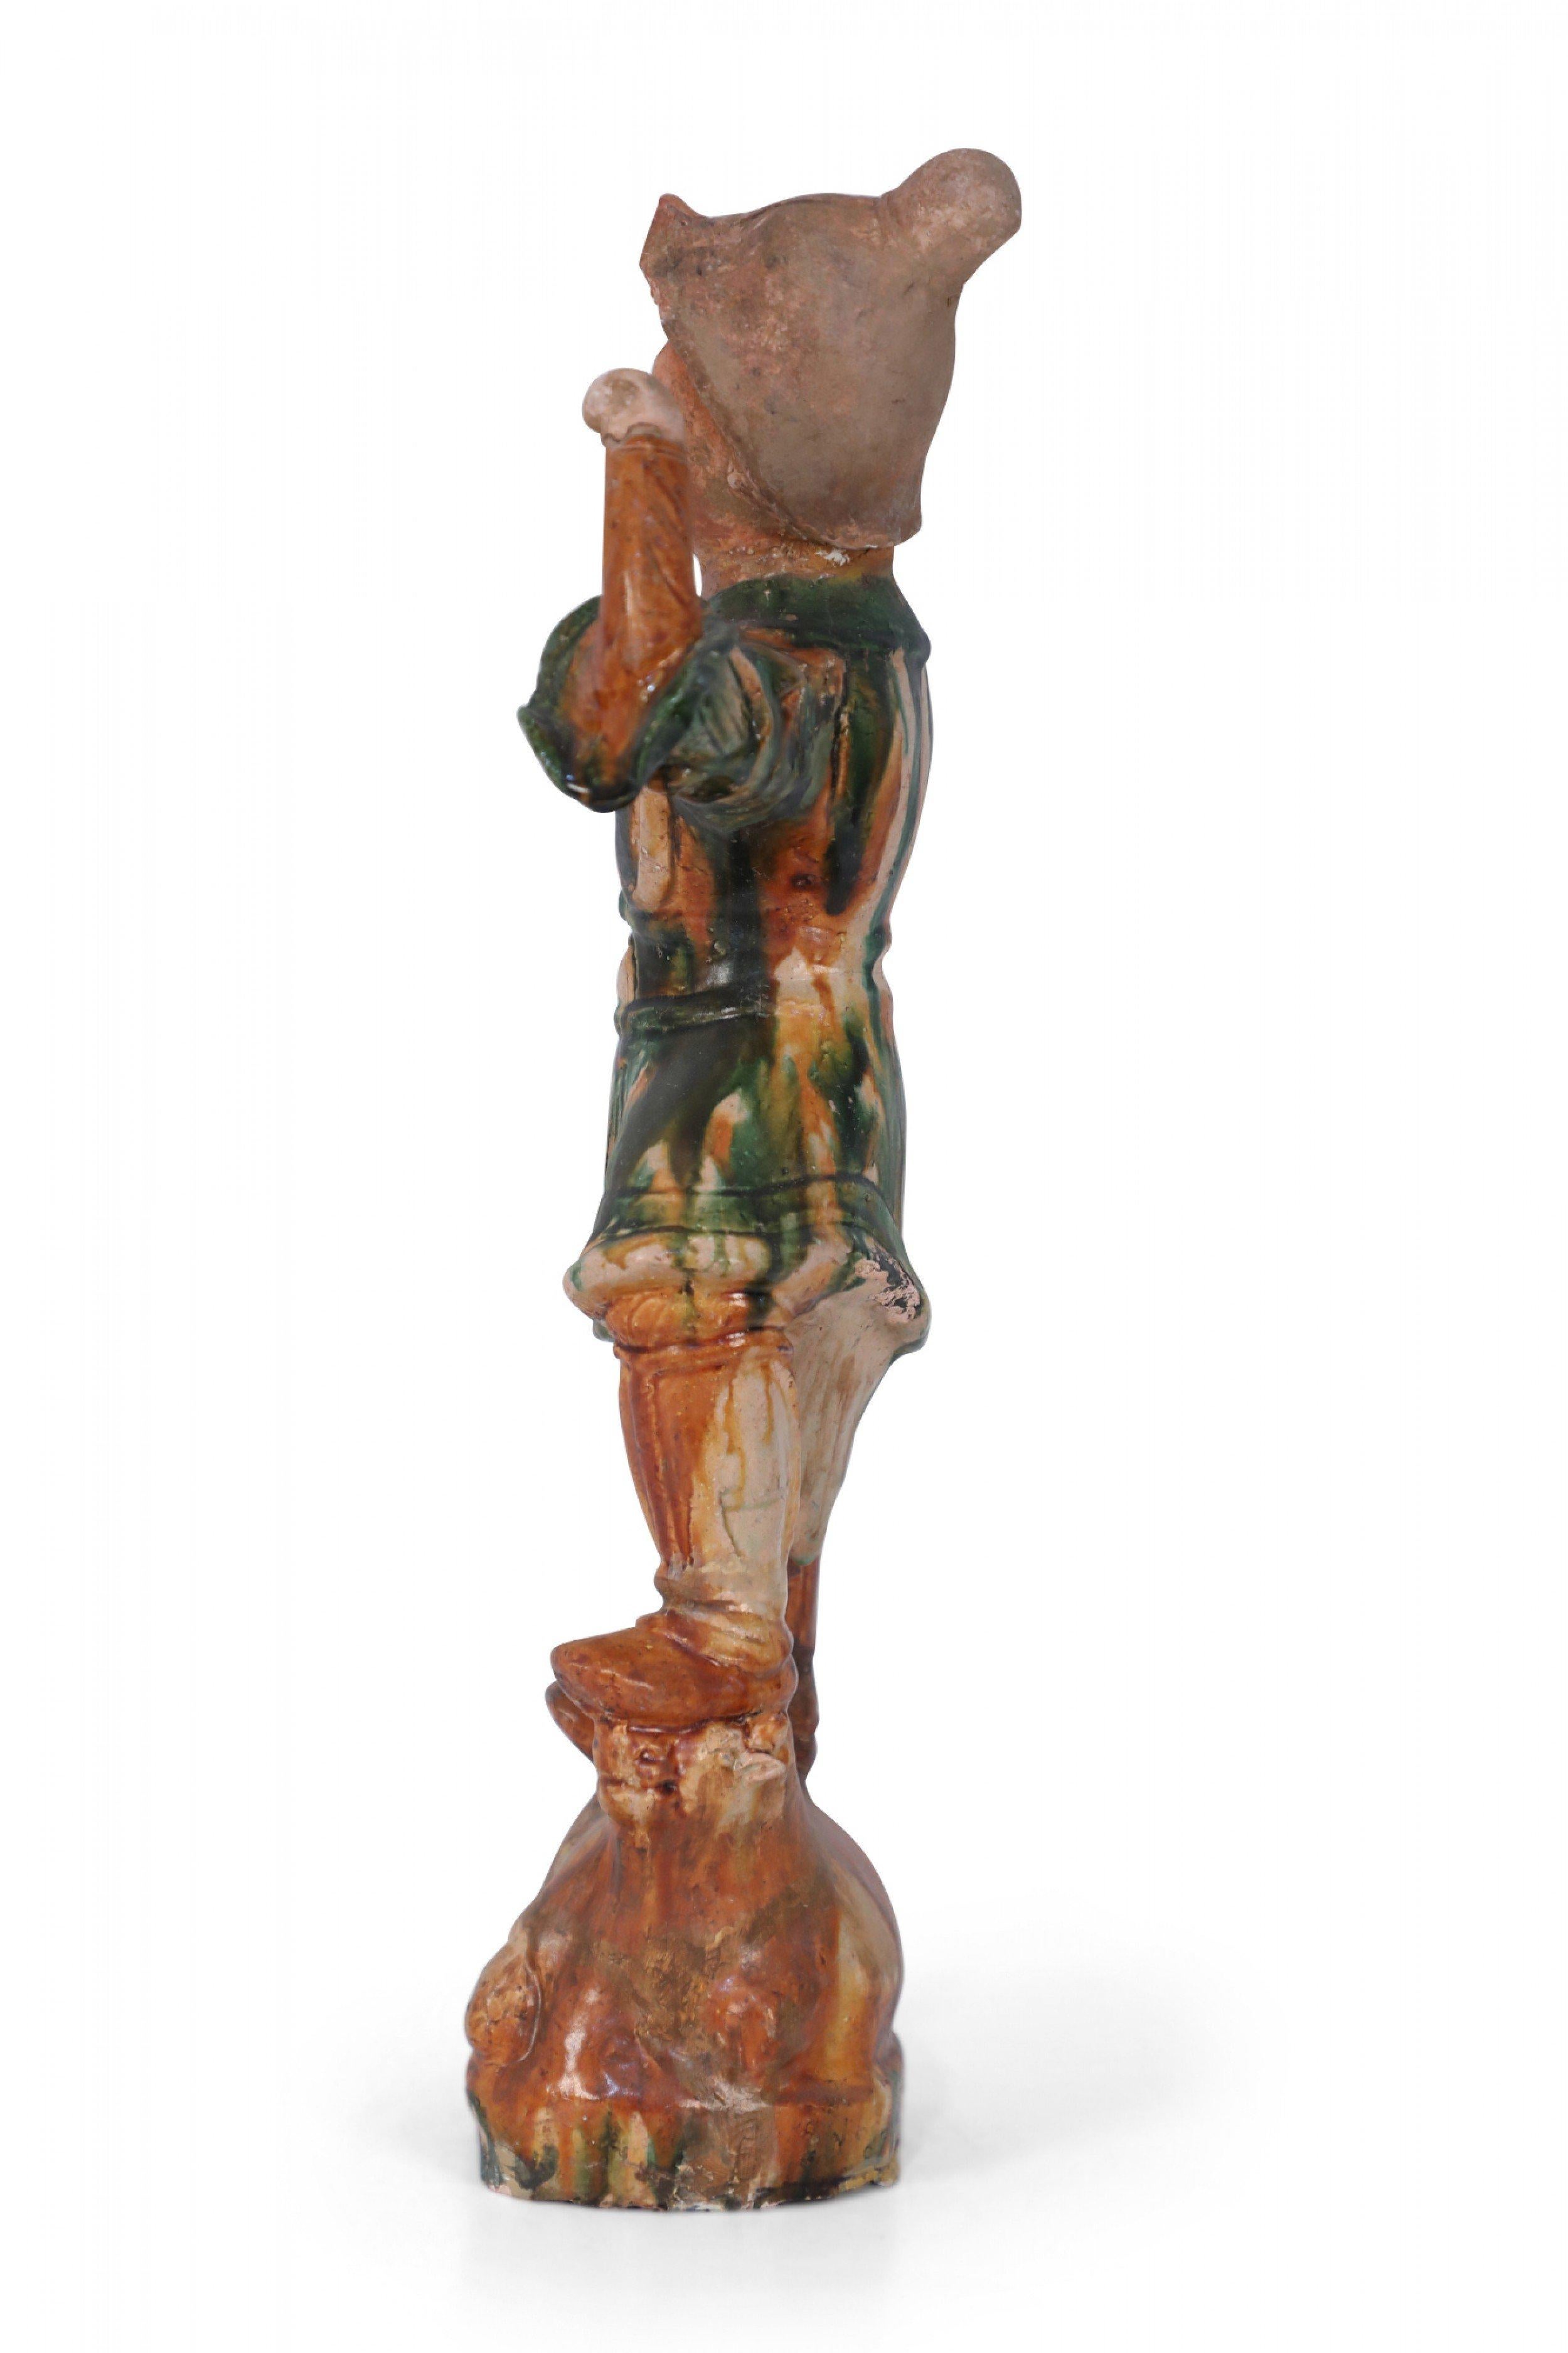 Antique Chinese Tang Dynasty-style terra cotta tomb guardian figure seen in its typical stance of one foot higher than the other as it rests on an animal ‚Äì in this figure, a cow ‚Äì and with one arm raised, and crafted with traditional tri-color